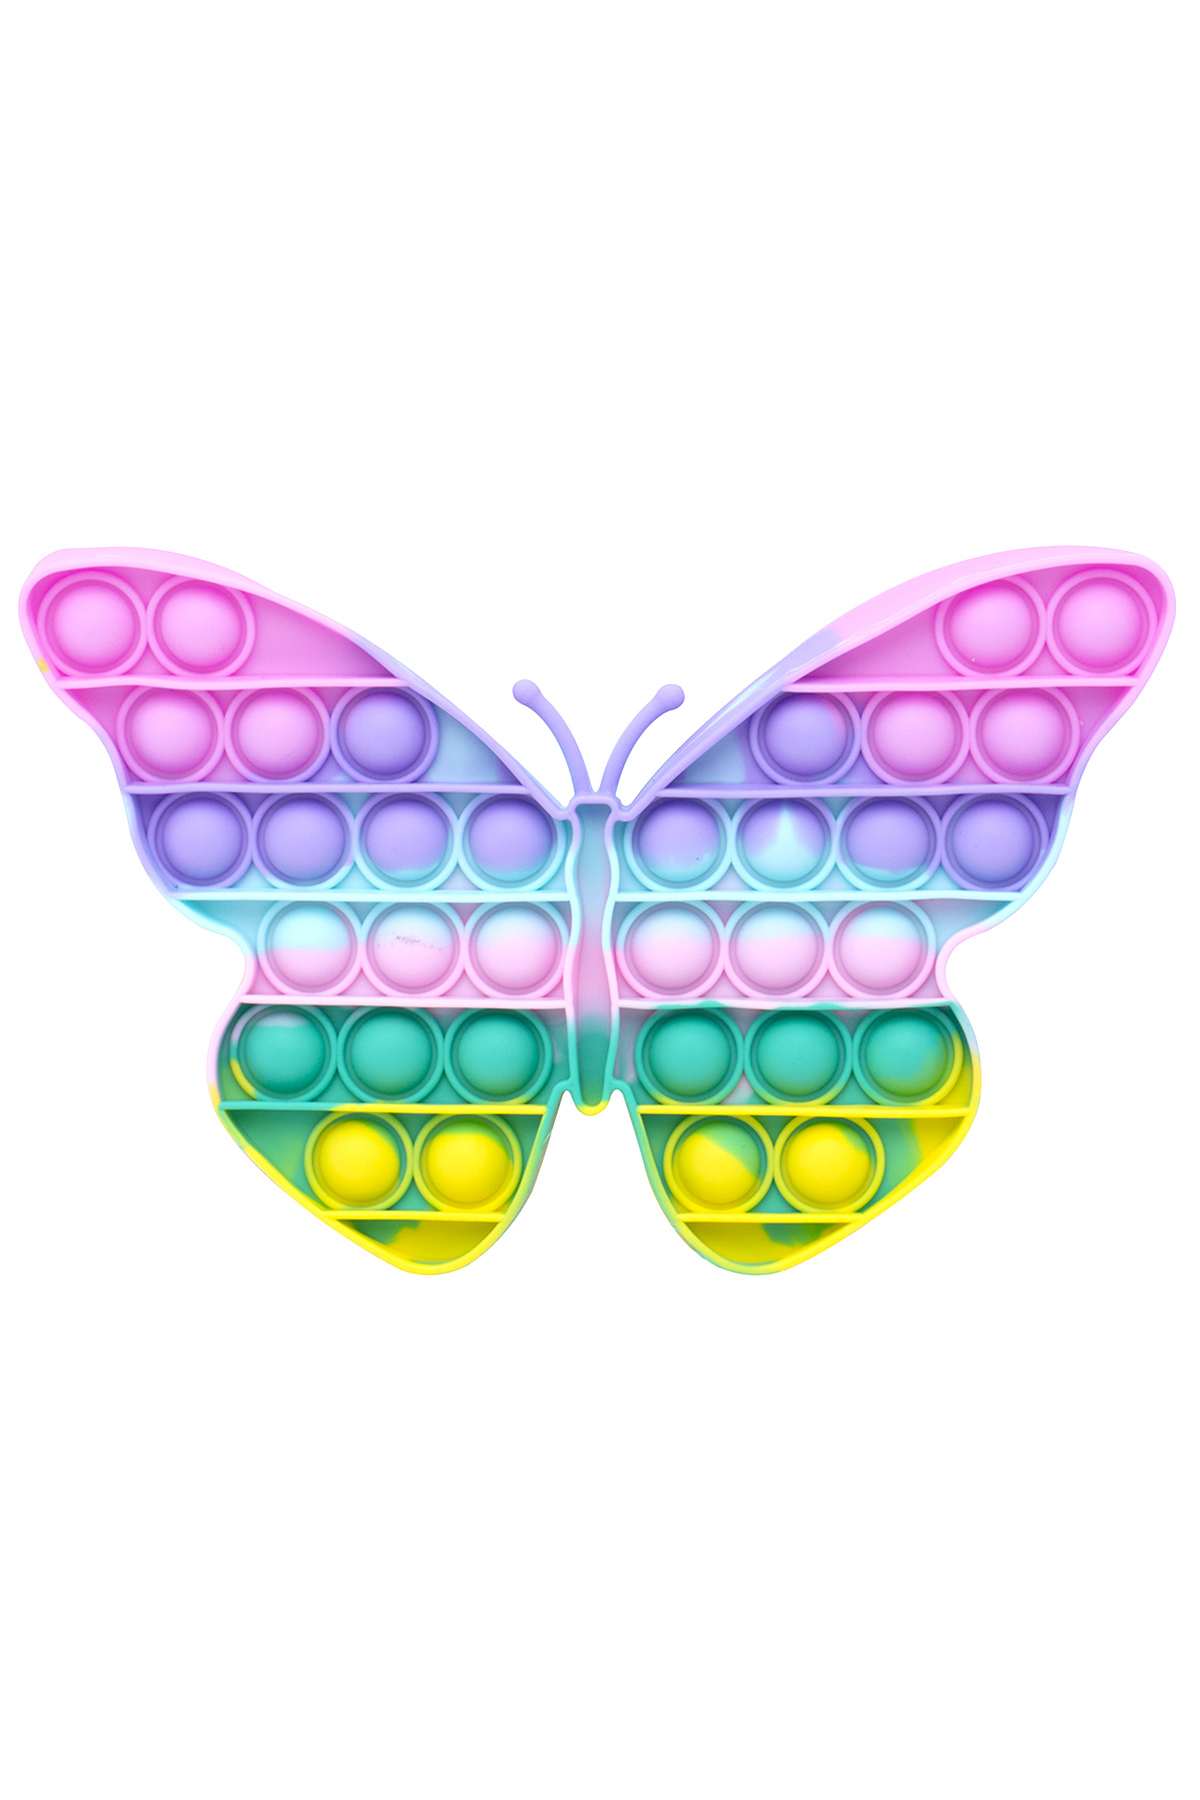 BUBBLE COLOR BUTTERFLY STRESS RELIEVER TOY